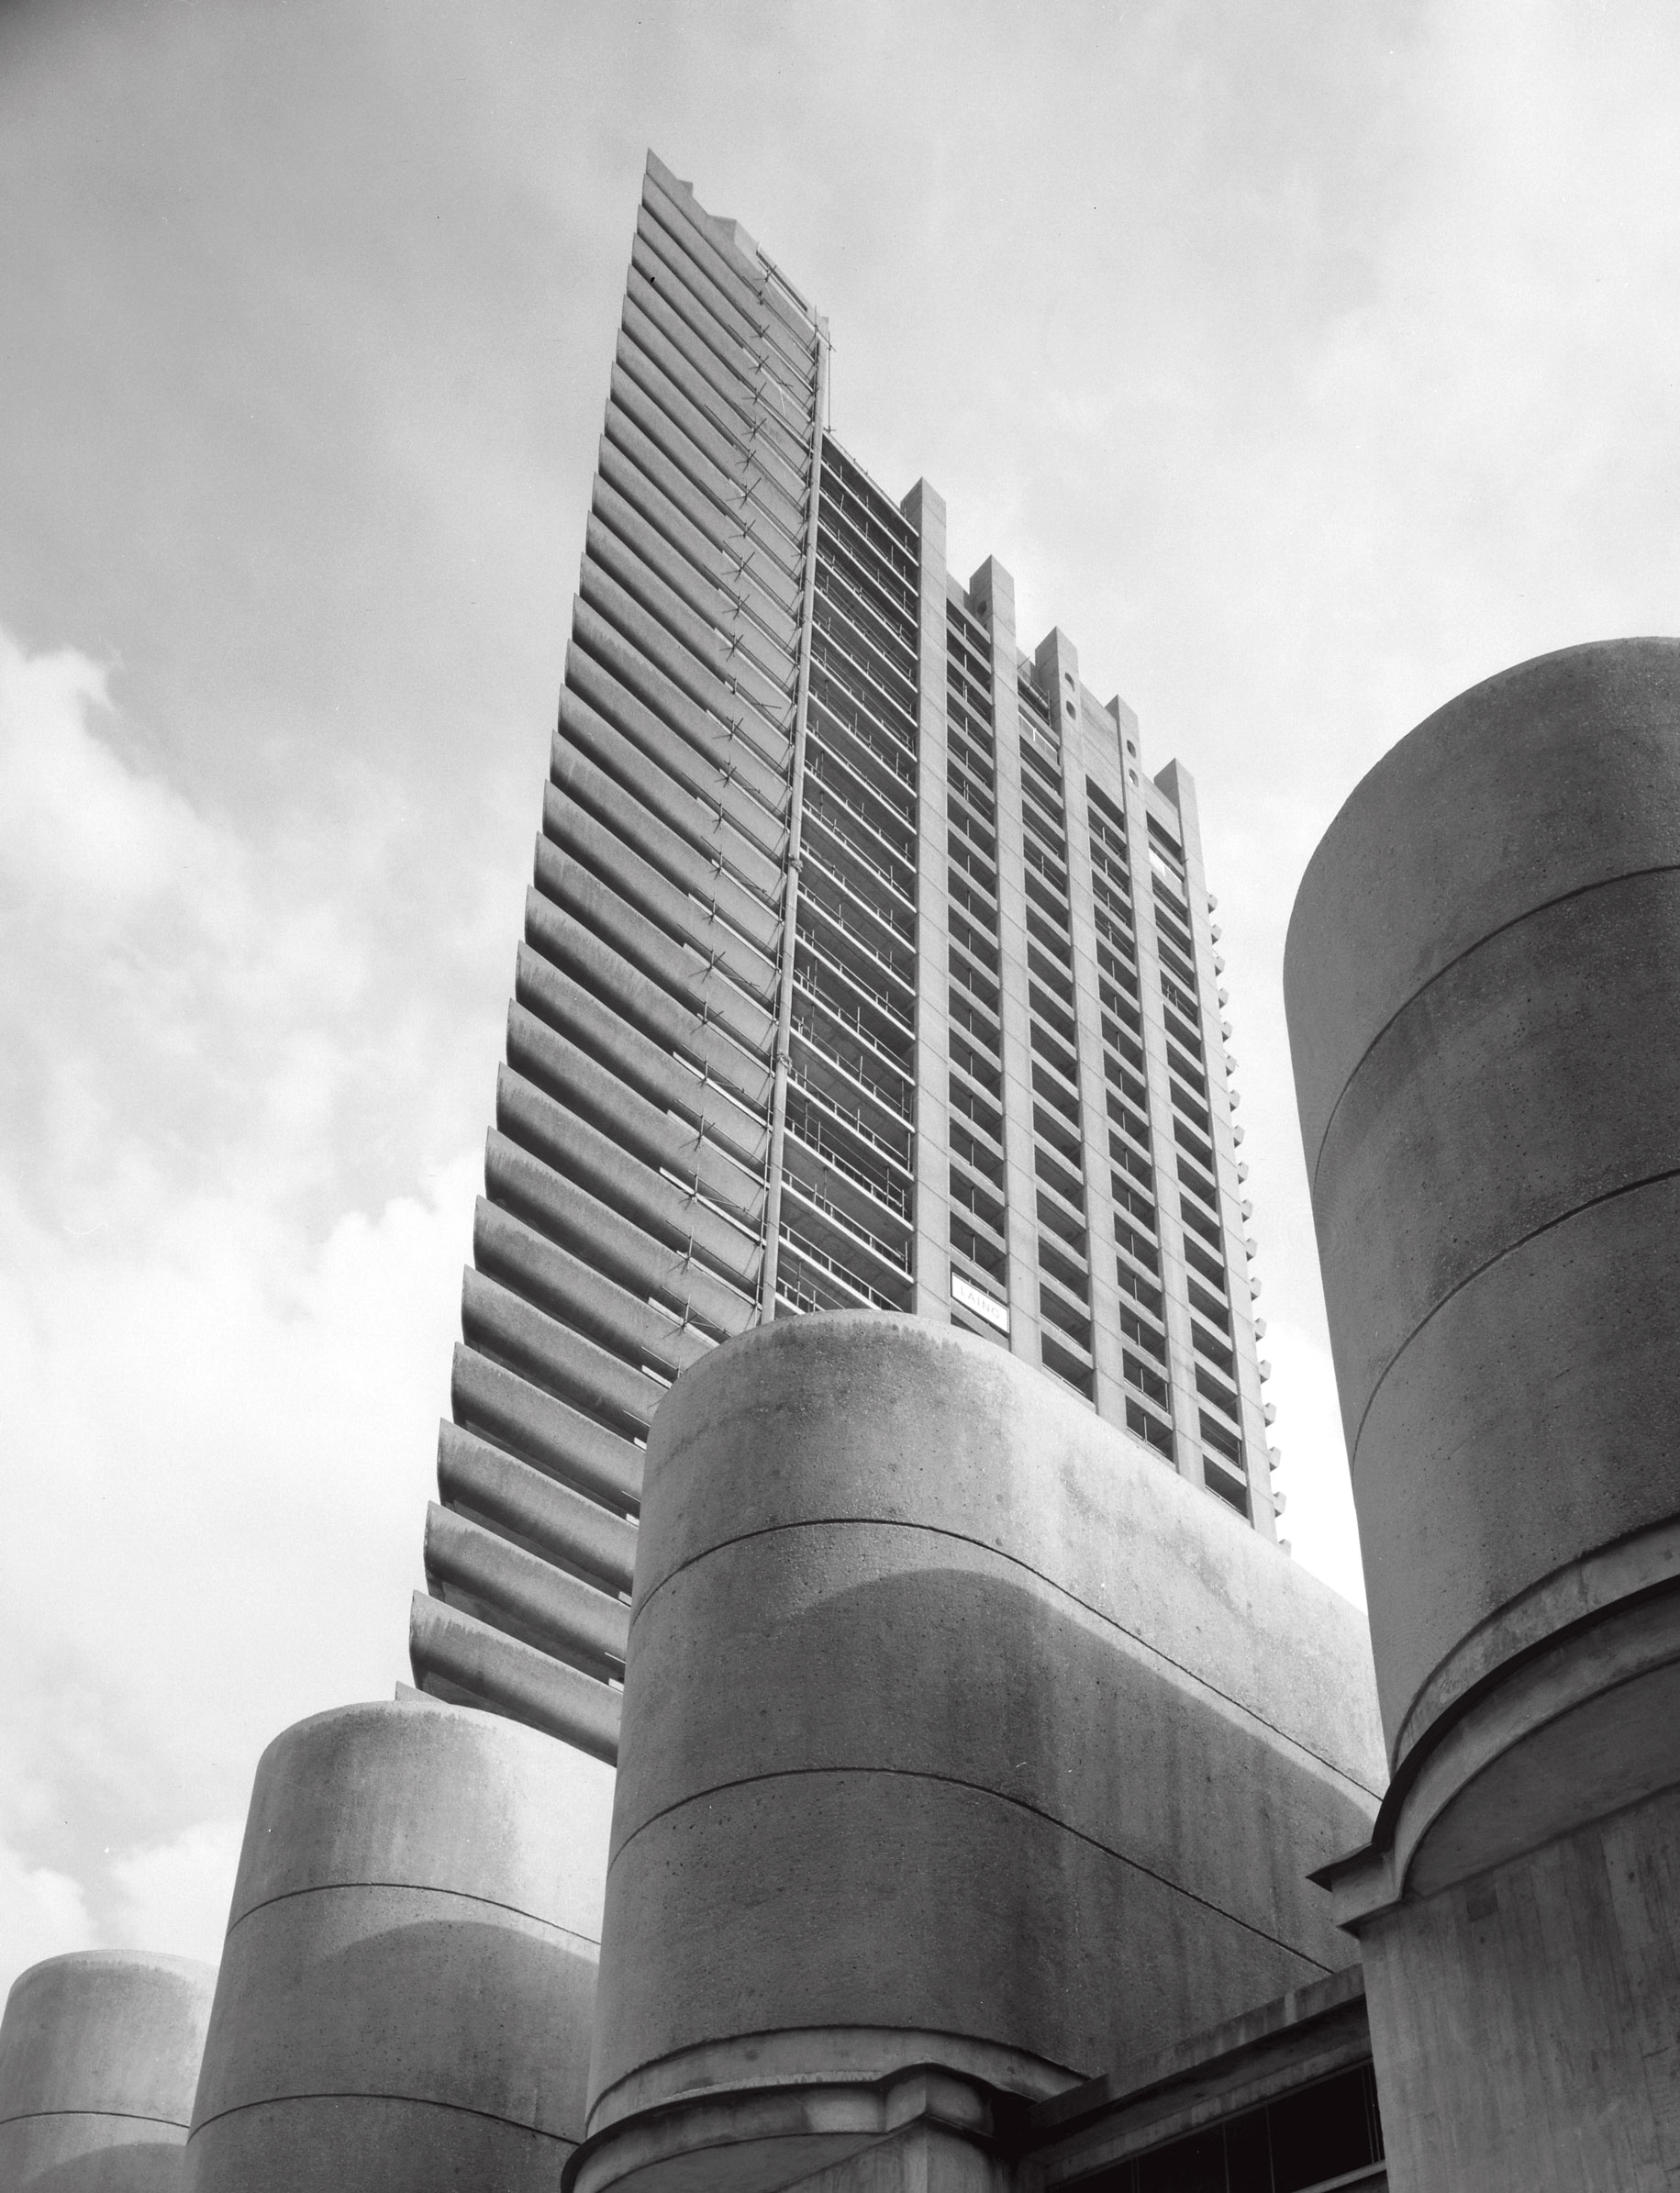 The Barbican as featured in Atlas of Brutalist Architecture